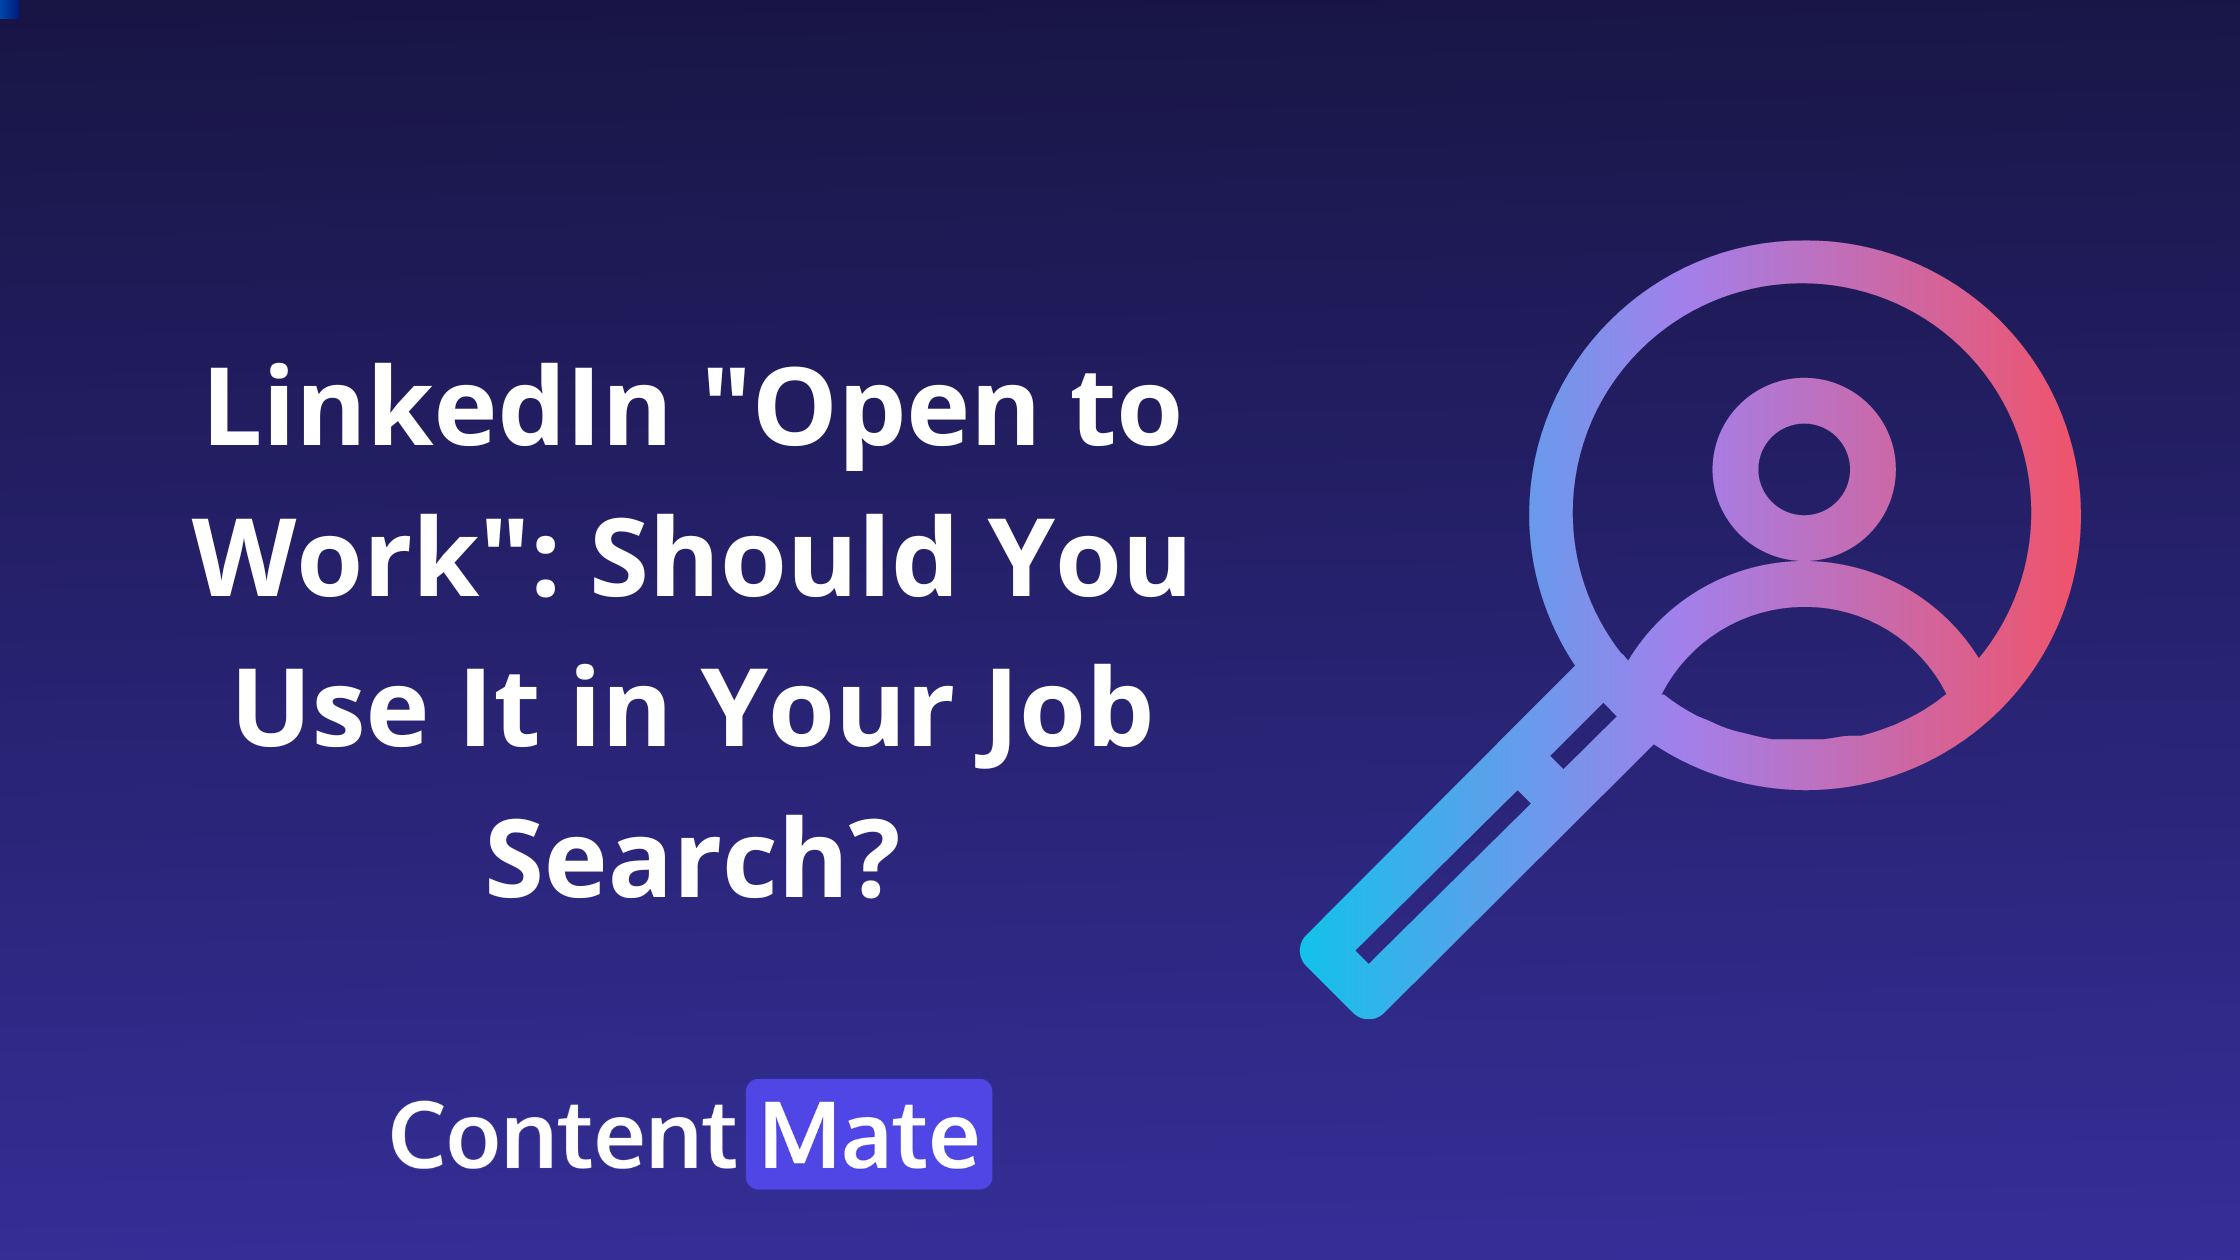 LinkedIn "Open to Work": Should You Use It in Your Job Search?